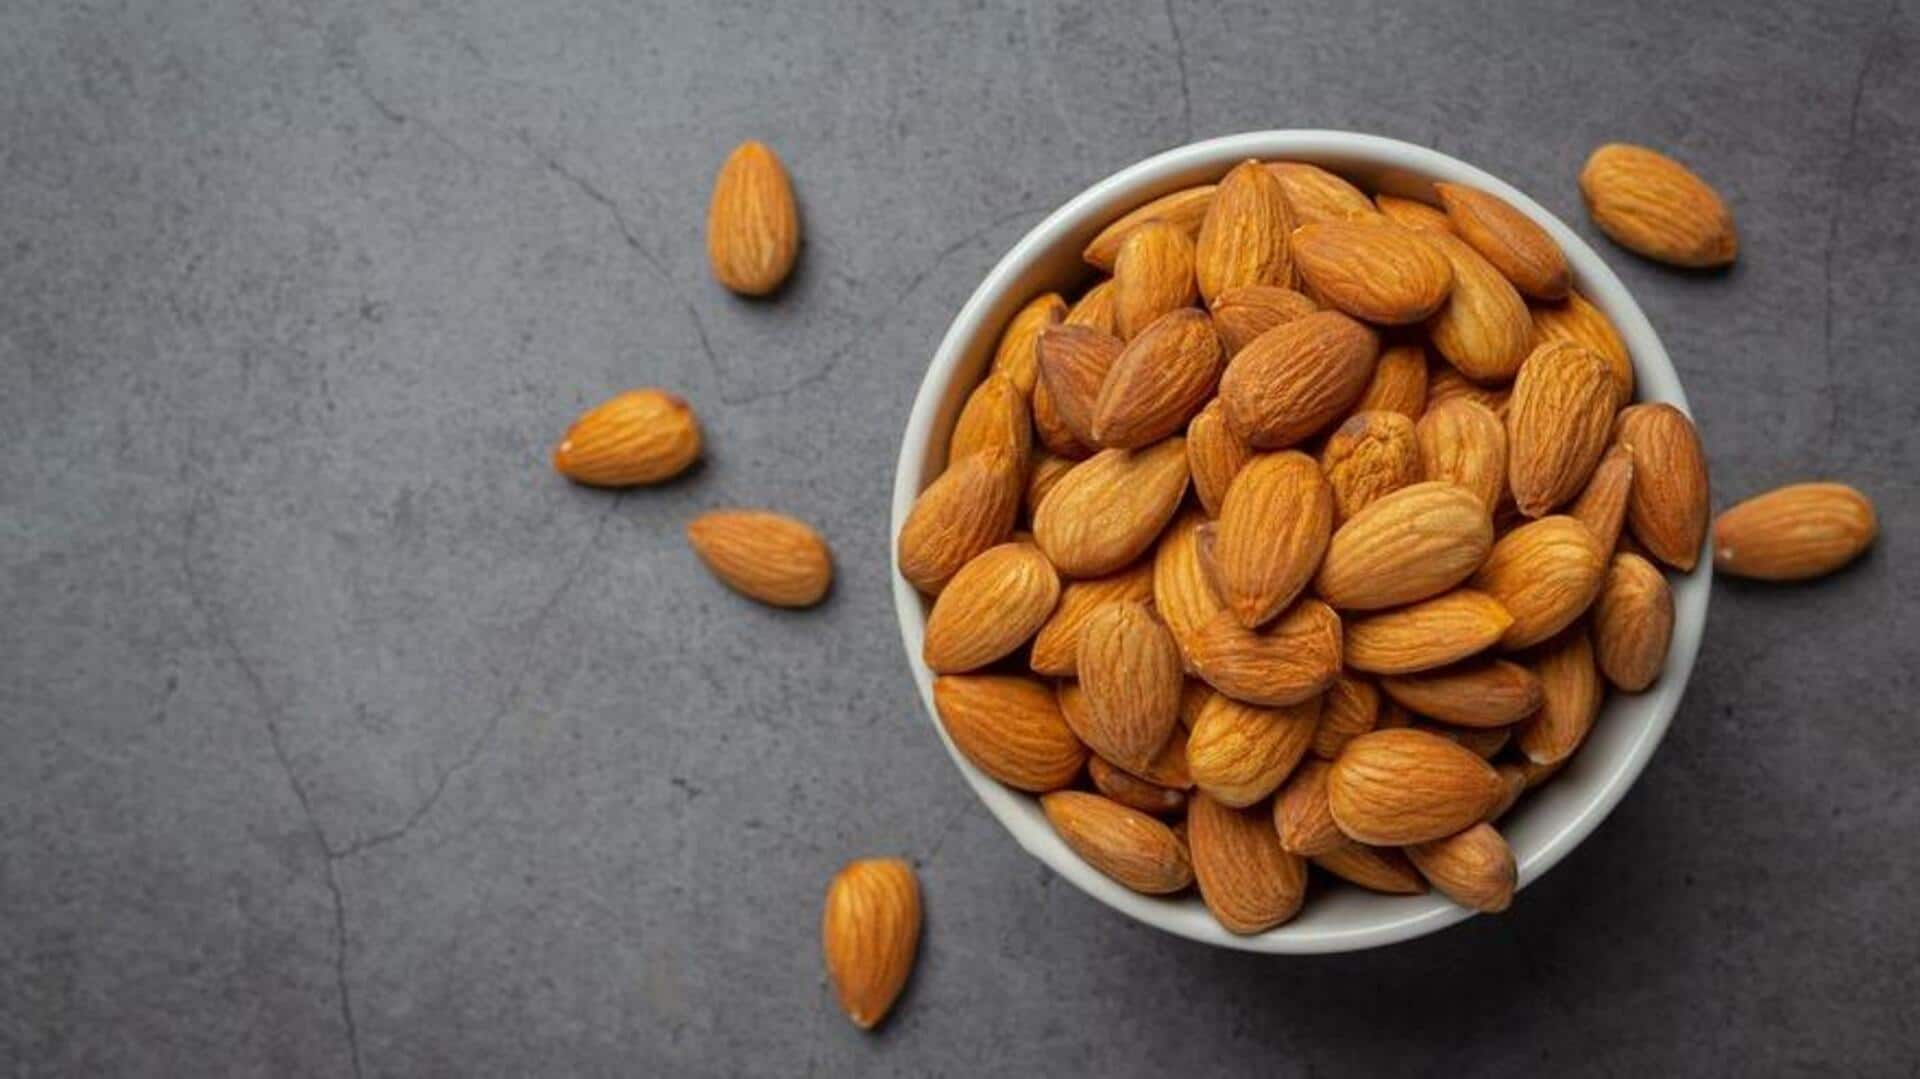 How much is too much: Signs you're overdosing on almonds